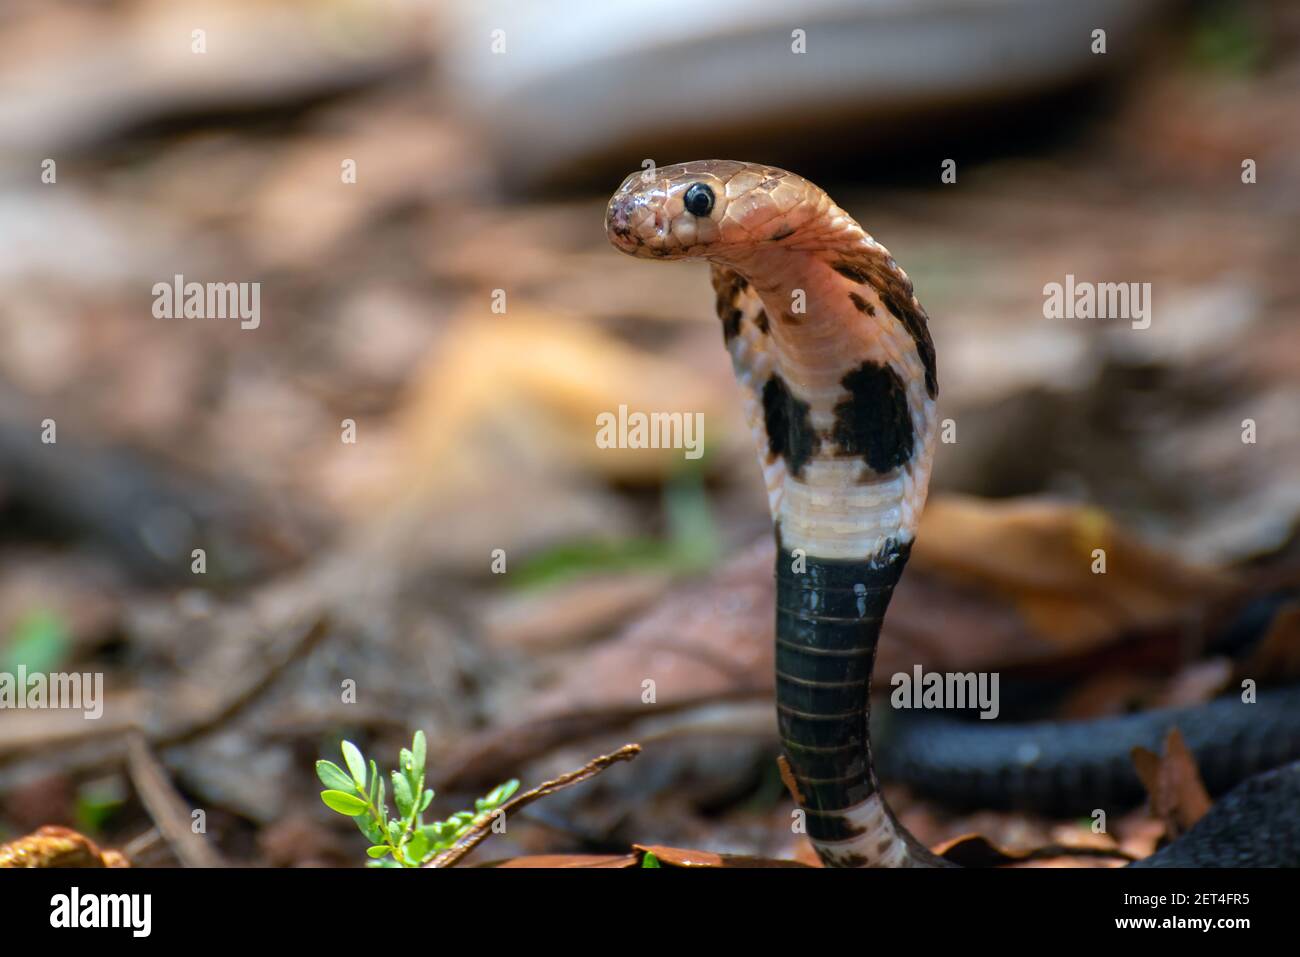 Young spitting cobra rearing up in defensive mode, Indonesia Stock Photo